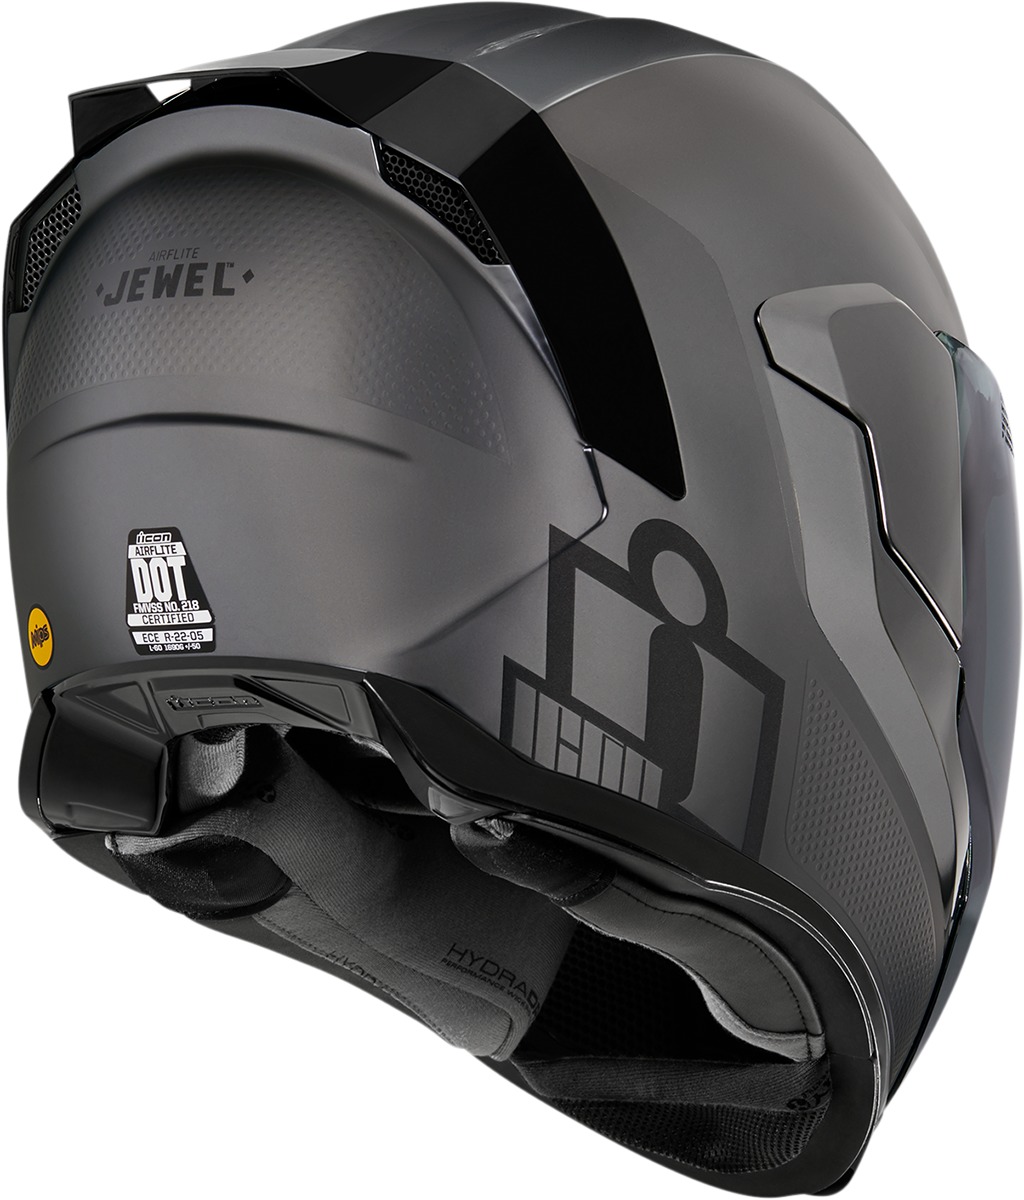 Silver Airflite Jewel MIPS Motorcycle Helmet - Large - Meets ECE 22.05 and DOT FMVSS-218 Standards - Click Image to Close